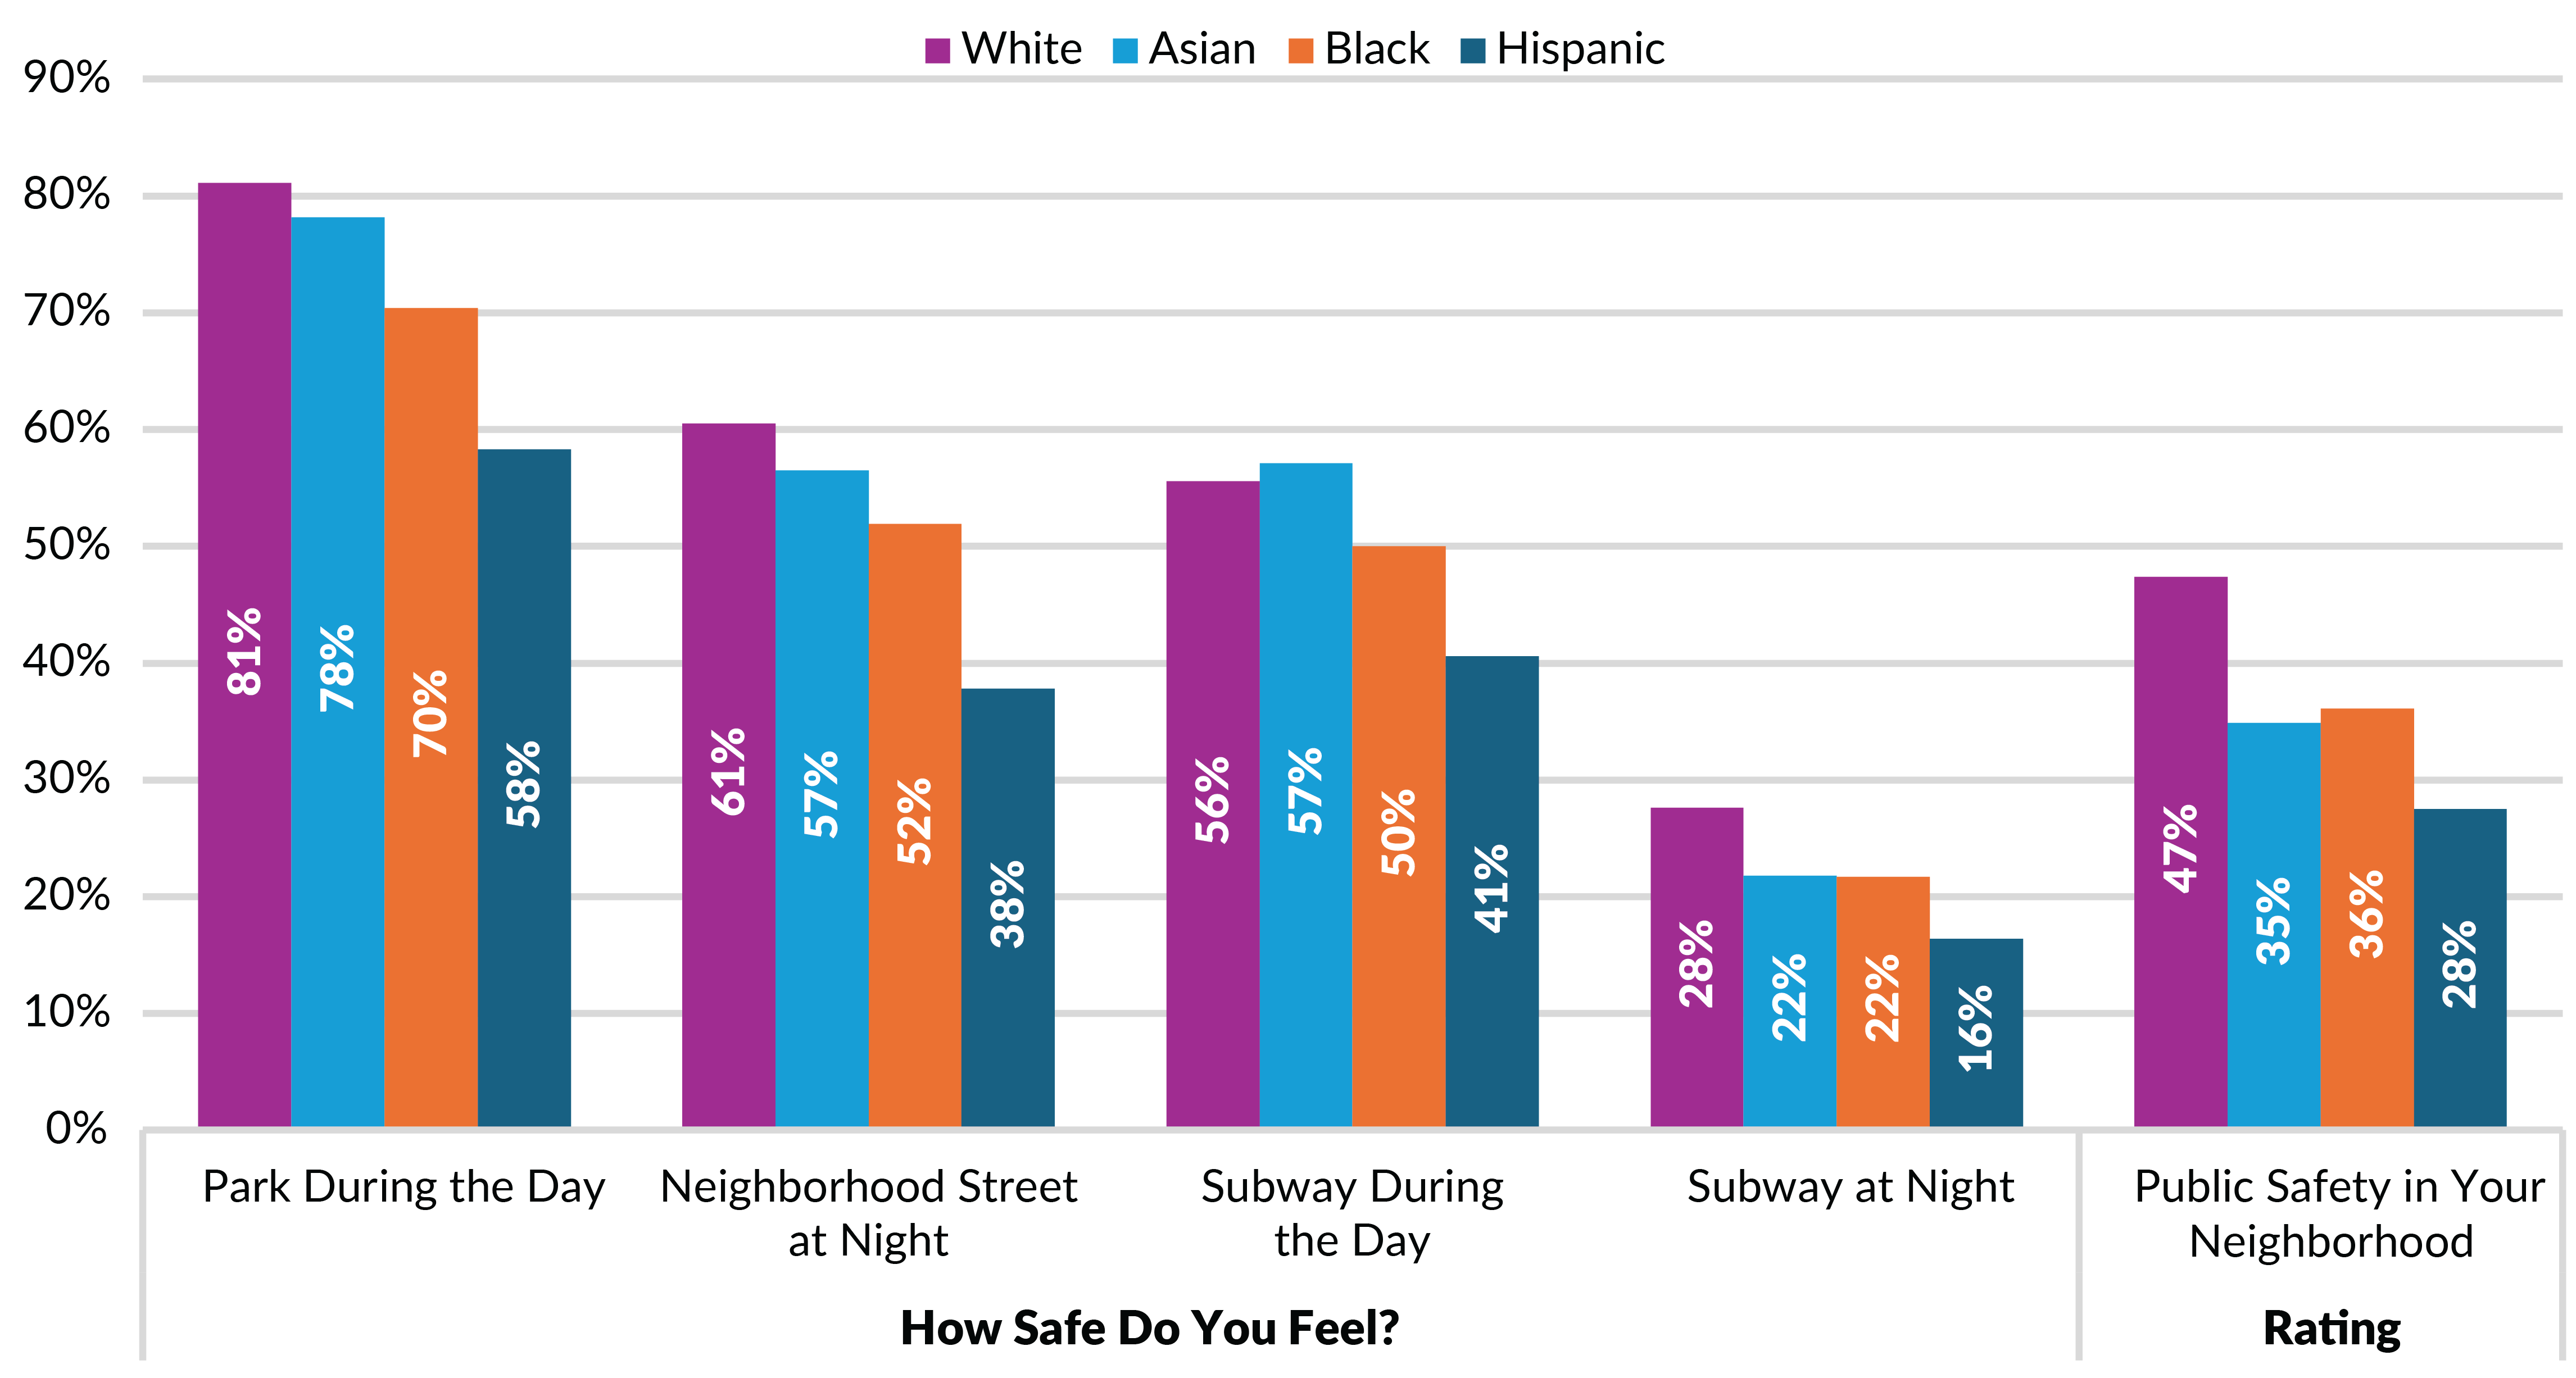 Figure 7: Percent Rating Public Safety Items Excellent or Good by Race/Ethnicity